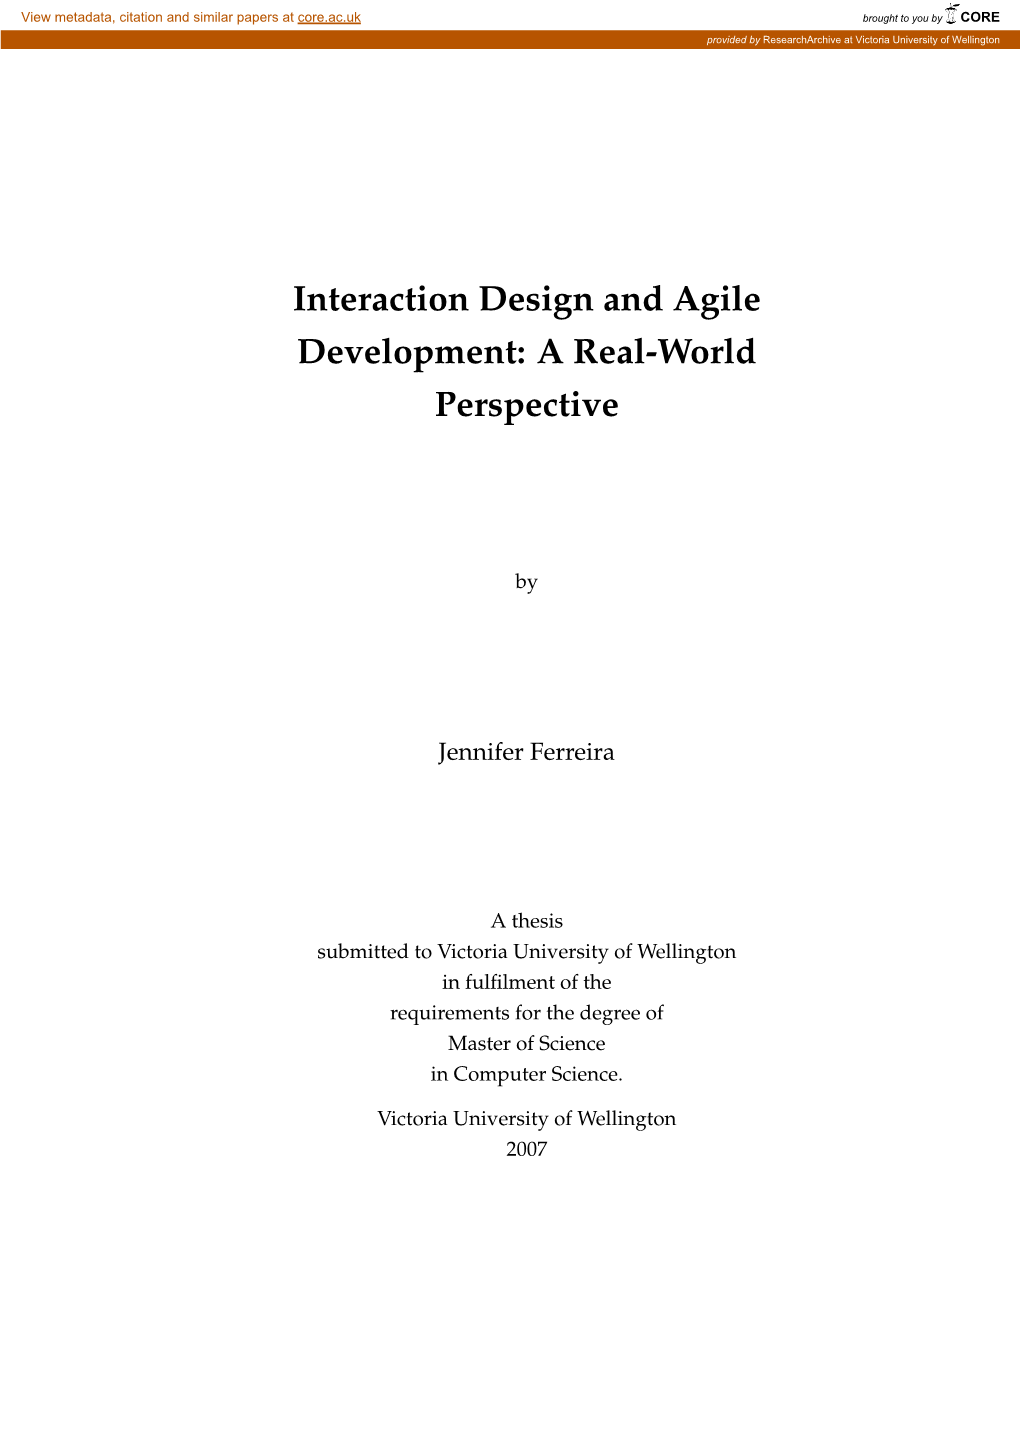 Interaction Design and Agile Development: a Real-World Perspective